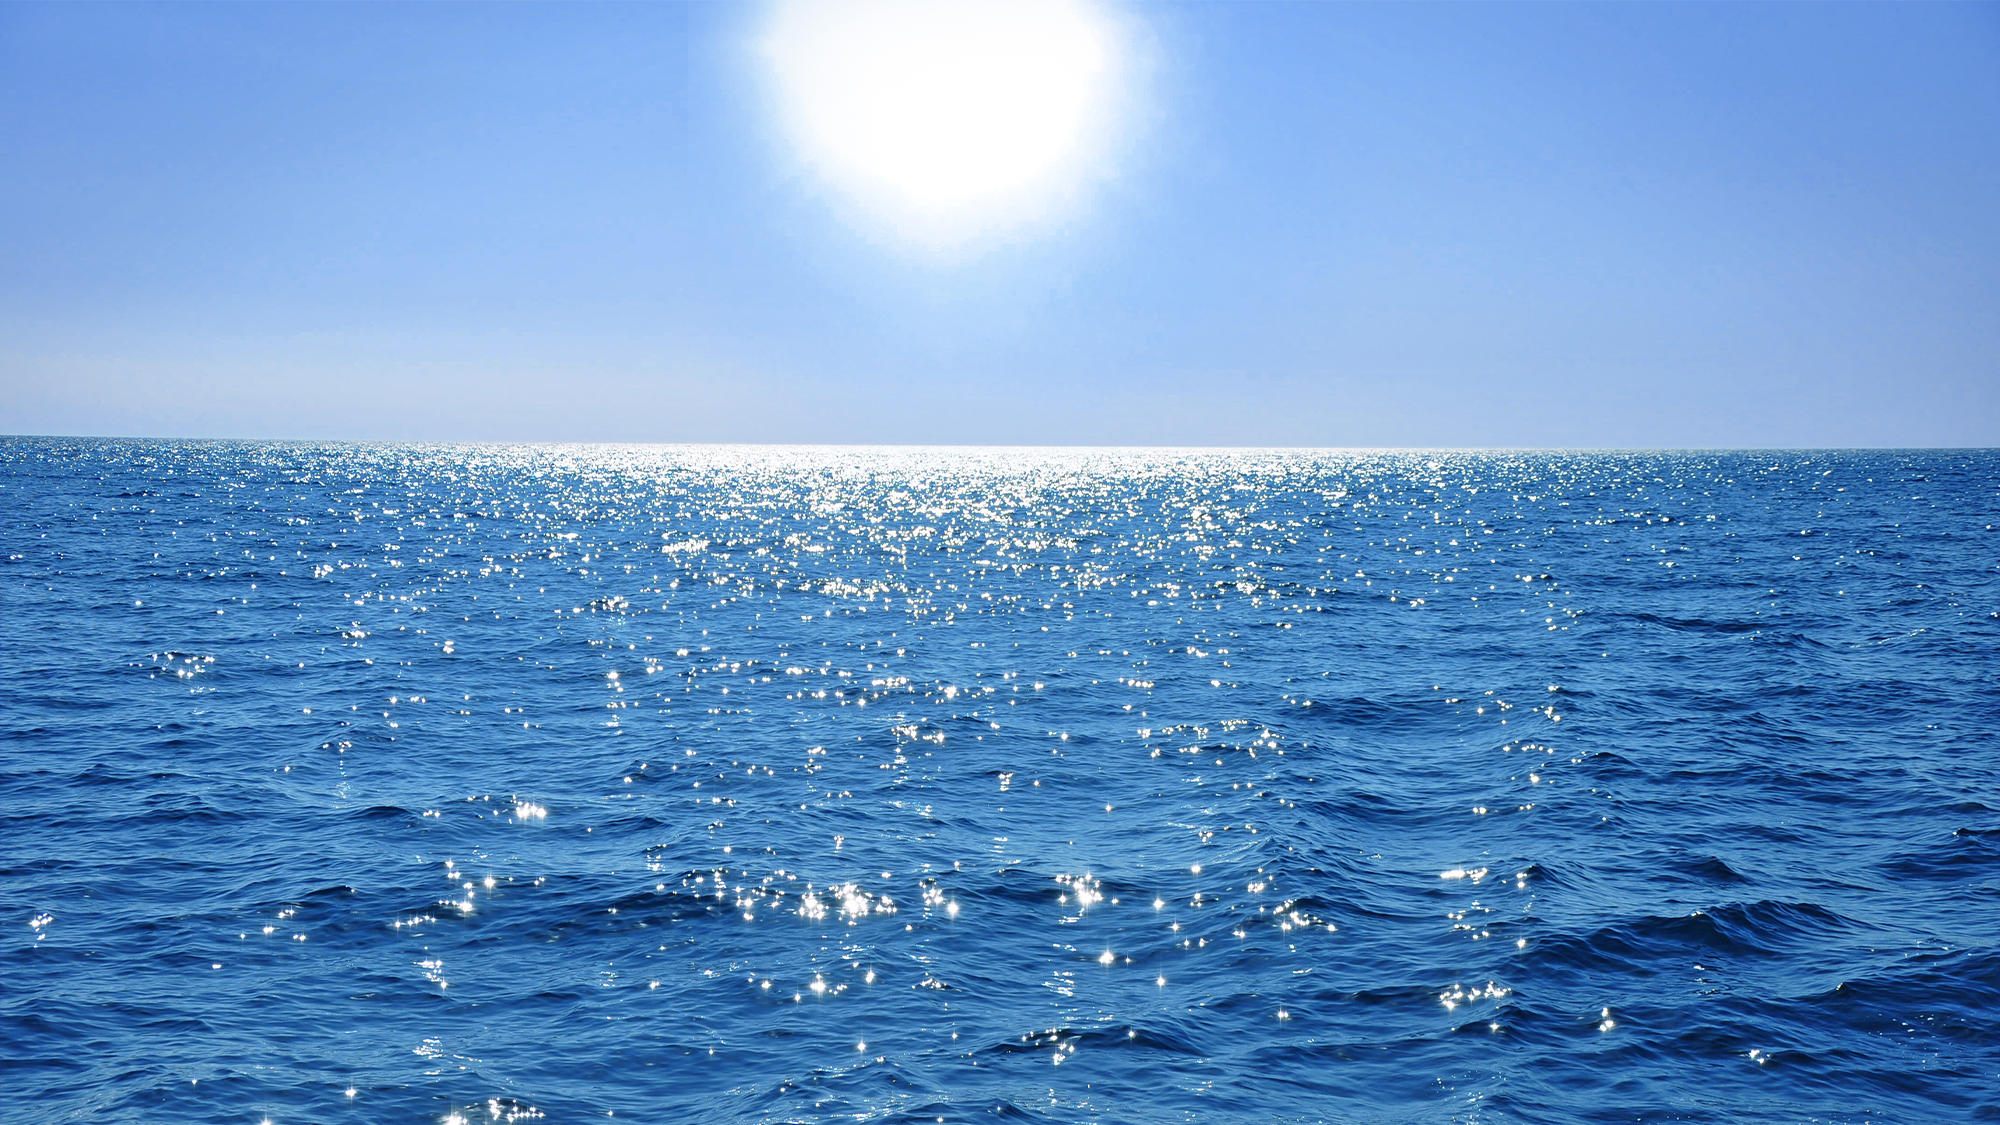 The sun over the ocean. Over 5,000 species could be at risk if deep sea mining begins in the Pacific Ocean's Clarion-Clipperton Zone.